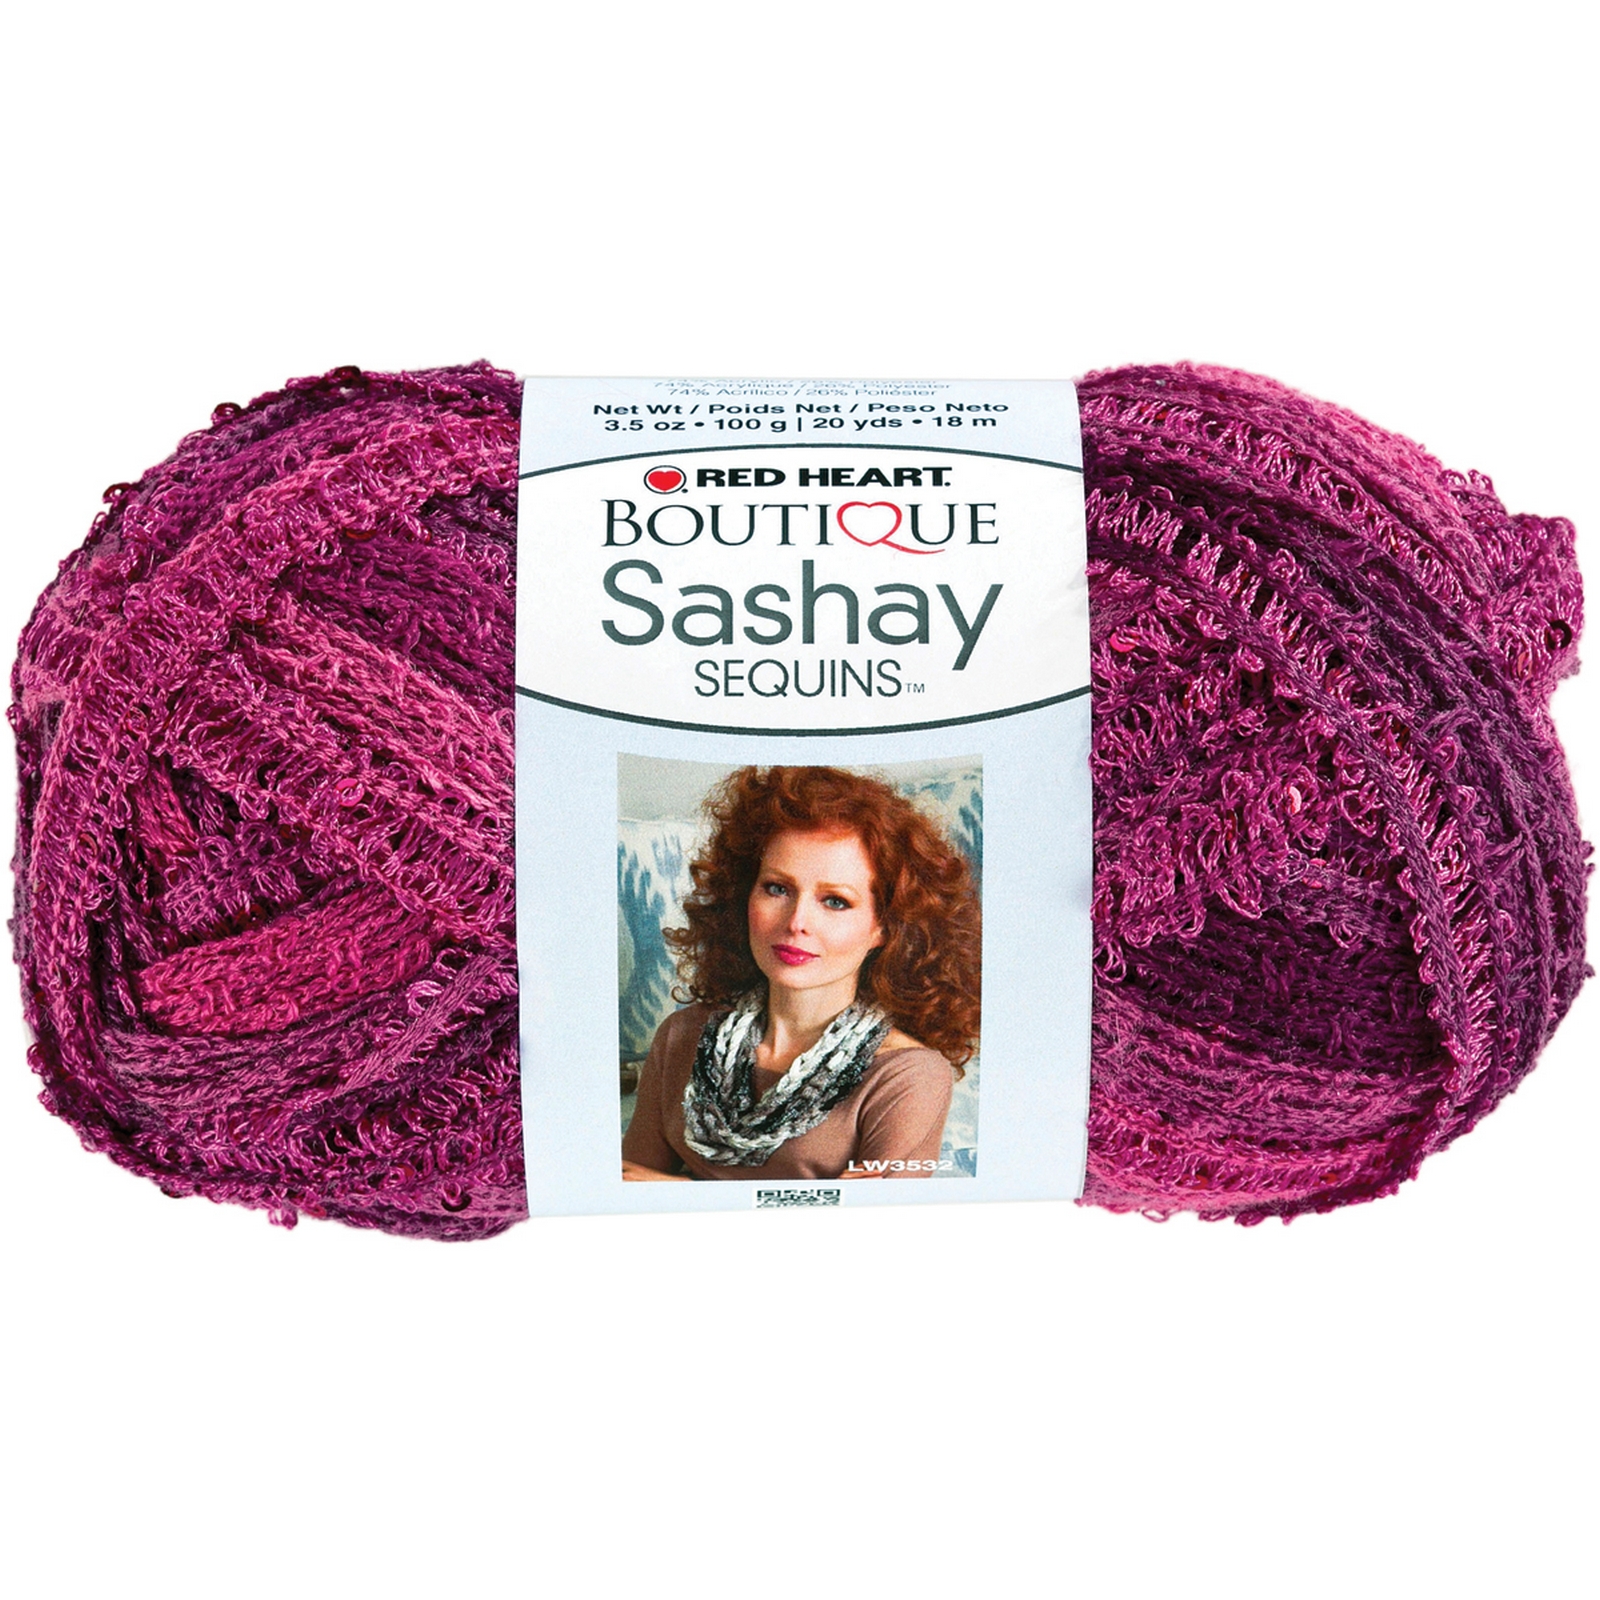 Red Heart Boutique Sashay Sequins Yarn Phlox